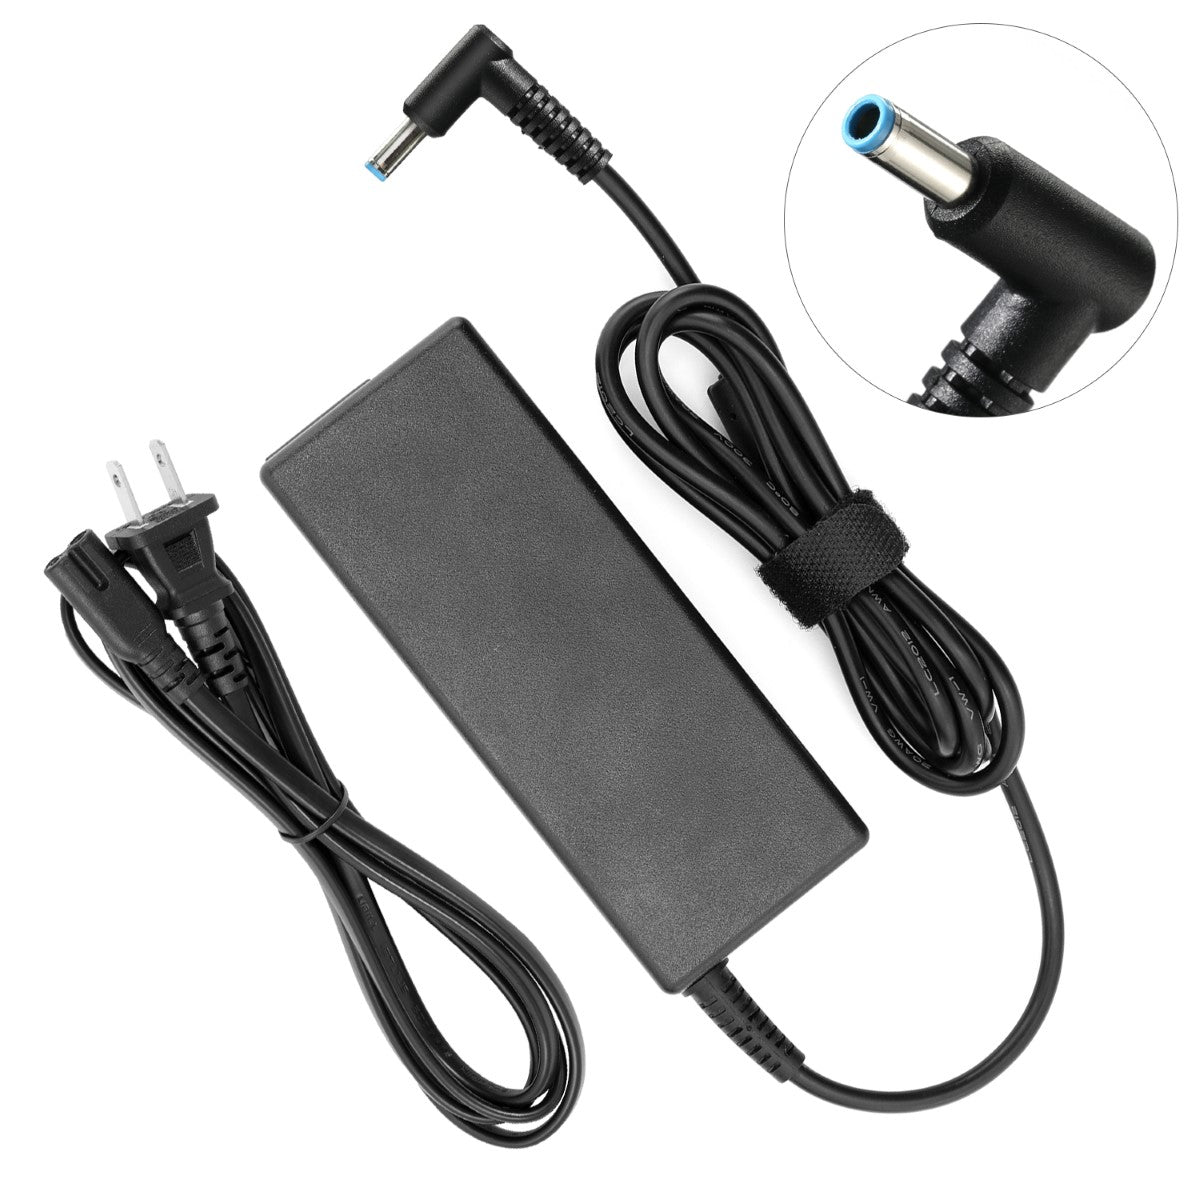 AC Adapter Charger for HP ProBook 430 G3 Notebook.